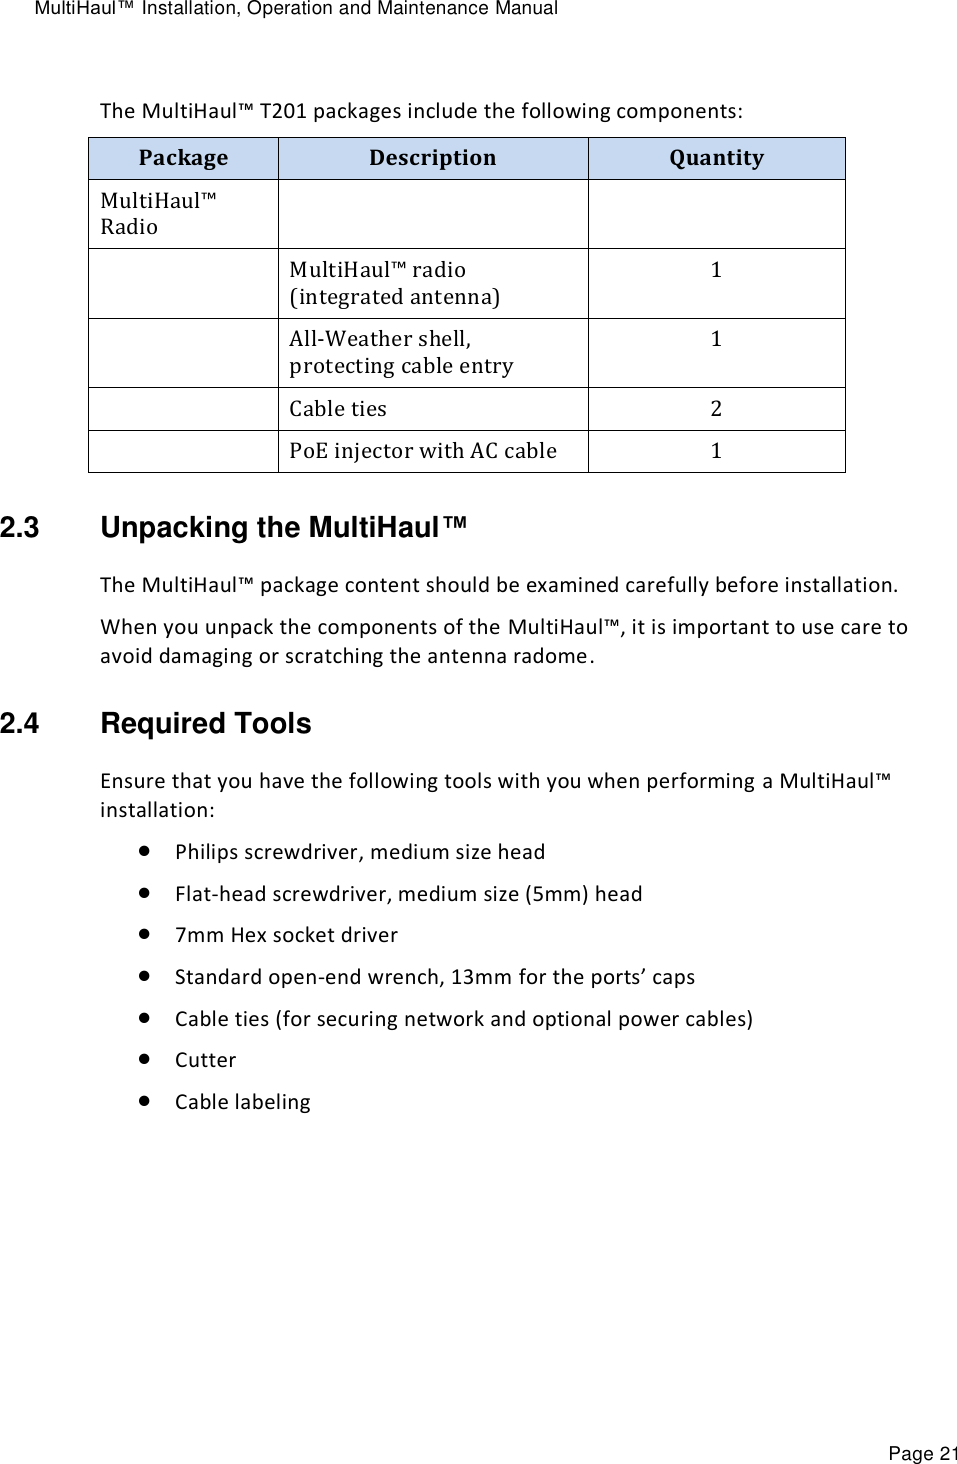 MultiHaul™ Installation, Operation and Maintenance Manual Page 21  The MultiHaul™ T201 packages include the following components: Package Description Quantity MultiHaul™ Radio    MultiHaul™ radio (integrated antenna) 1  All-Weather shell, protecting cable entry 1   Cable ties 2  PoE injector with AC cable 1 2.3  Unpacking the MultiHaul™  The MultiHaul™ package content should be examined carefully before installation. When you unpack the components of the MultiHaul™, it is important to use care to avoid damaging or scratching the antenna radome. 2.4  Required Tools Ensure that you have the following tools with you when performing a MultiHaul™ installation:  Philips screwdriver, medium size head   Flat-head screwdriver, medium size (5mm) head   7mm Hex socket driver  Standard open-end wrench, 13mm for the ports’ caps  Cable ties (for securing network and optional power cables)   Cutter  Cable labeling 